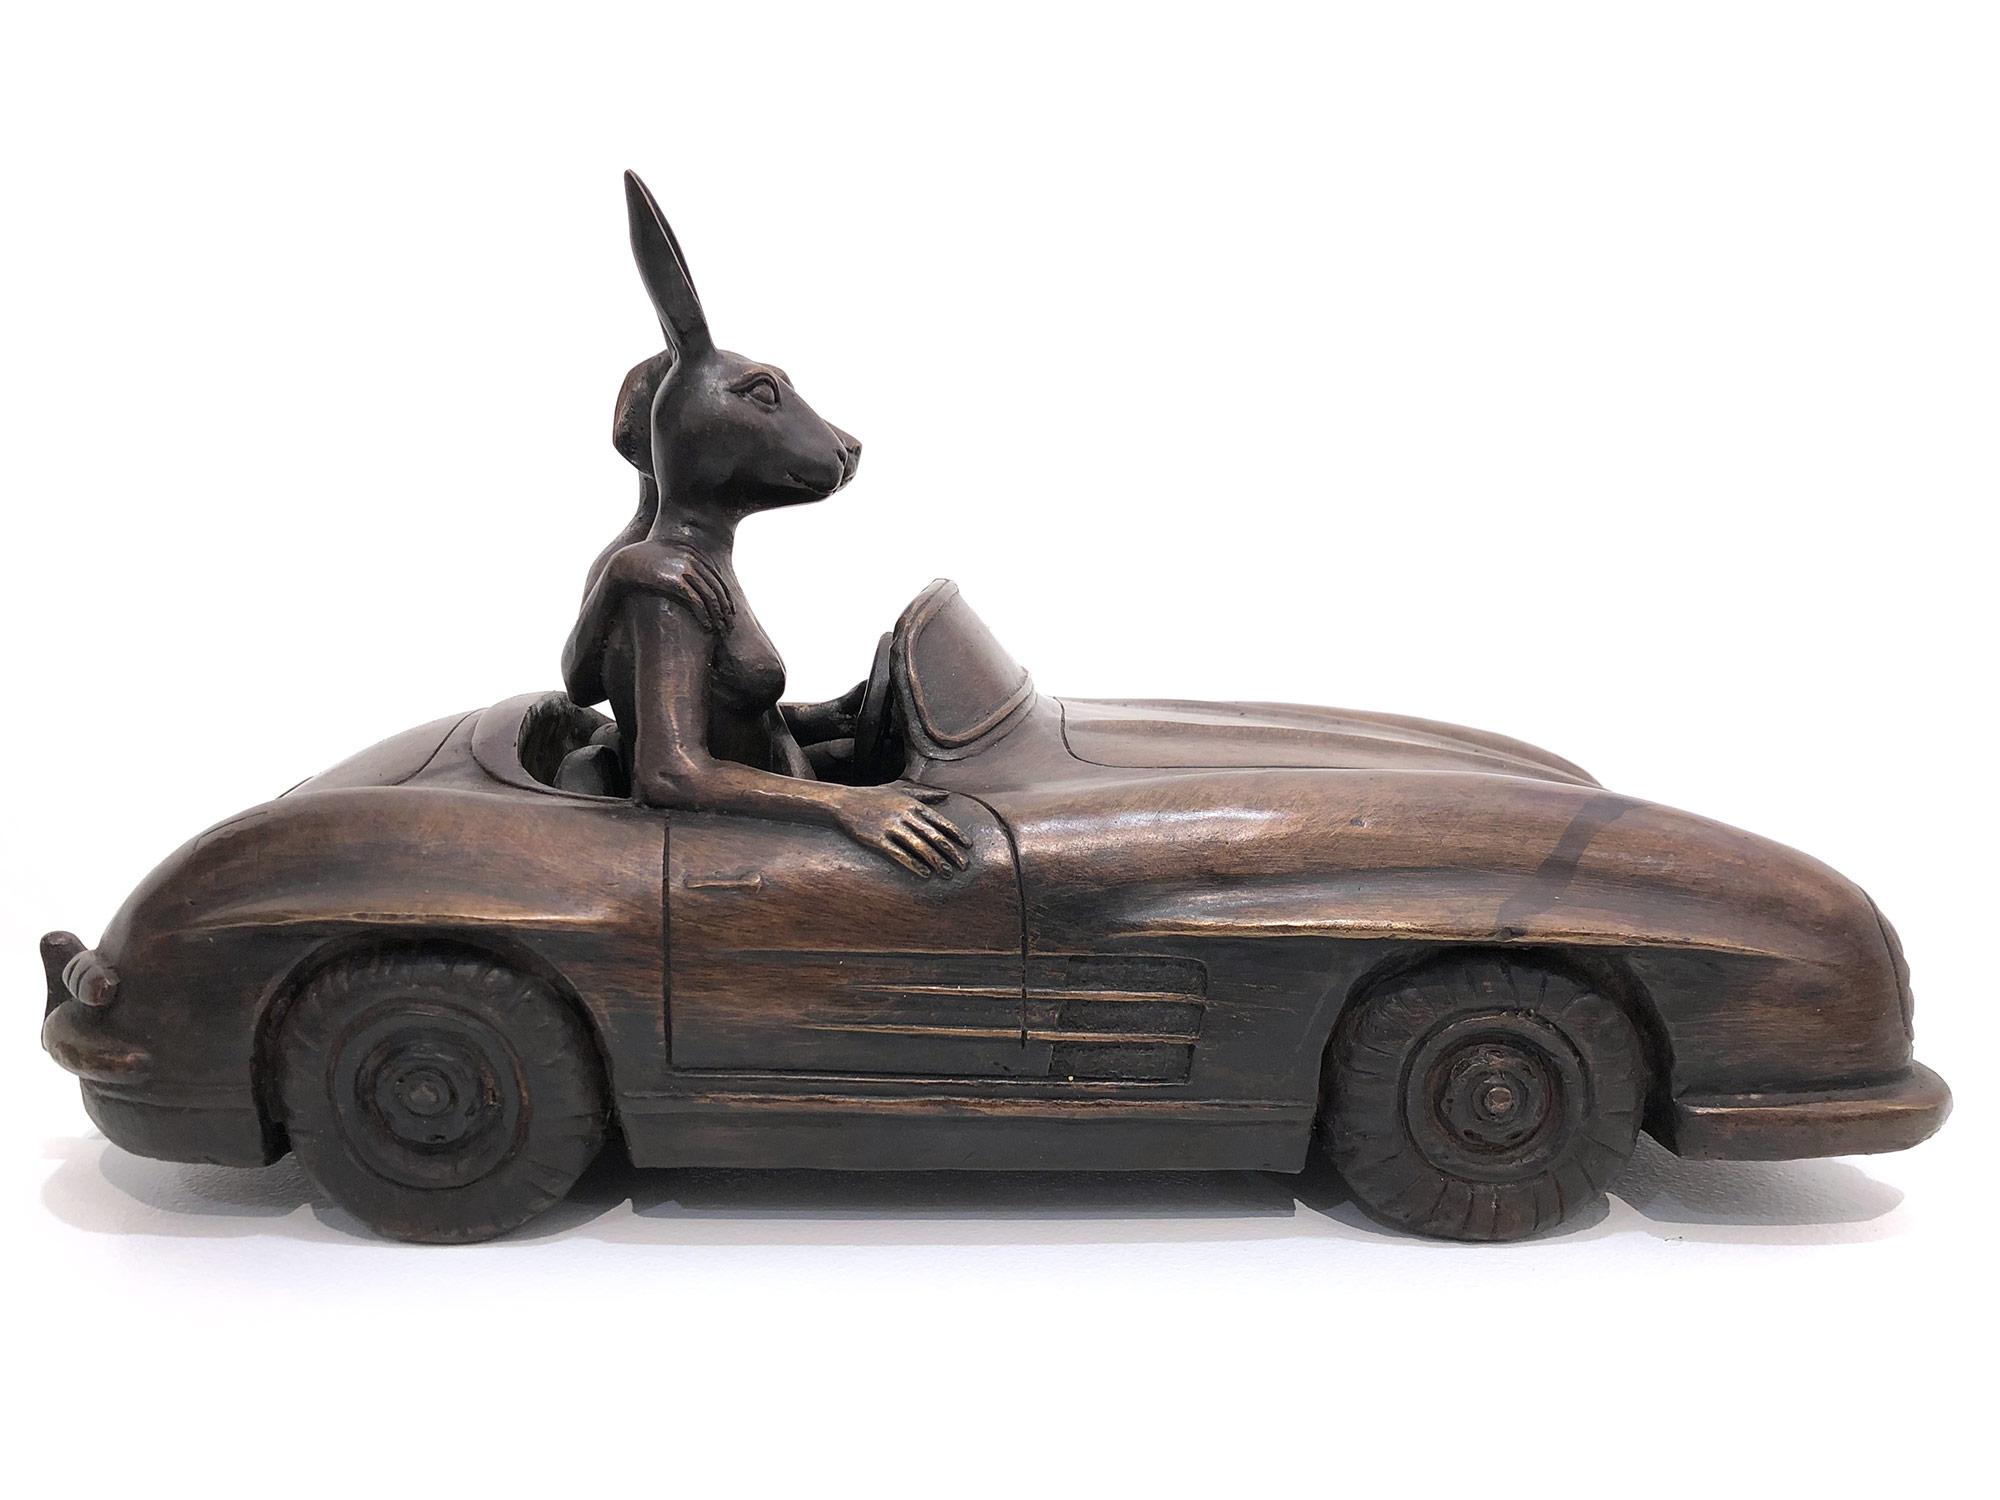 A Merc is a Rabbit and Dogs' Best Friend - Gold Figurative Sculpture by Gillie and Marc Schattner